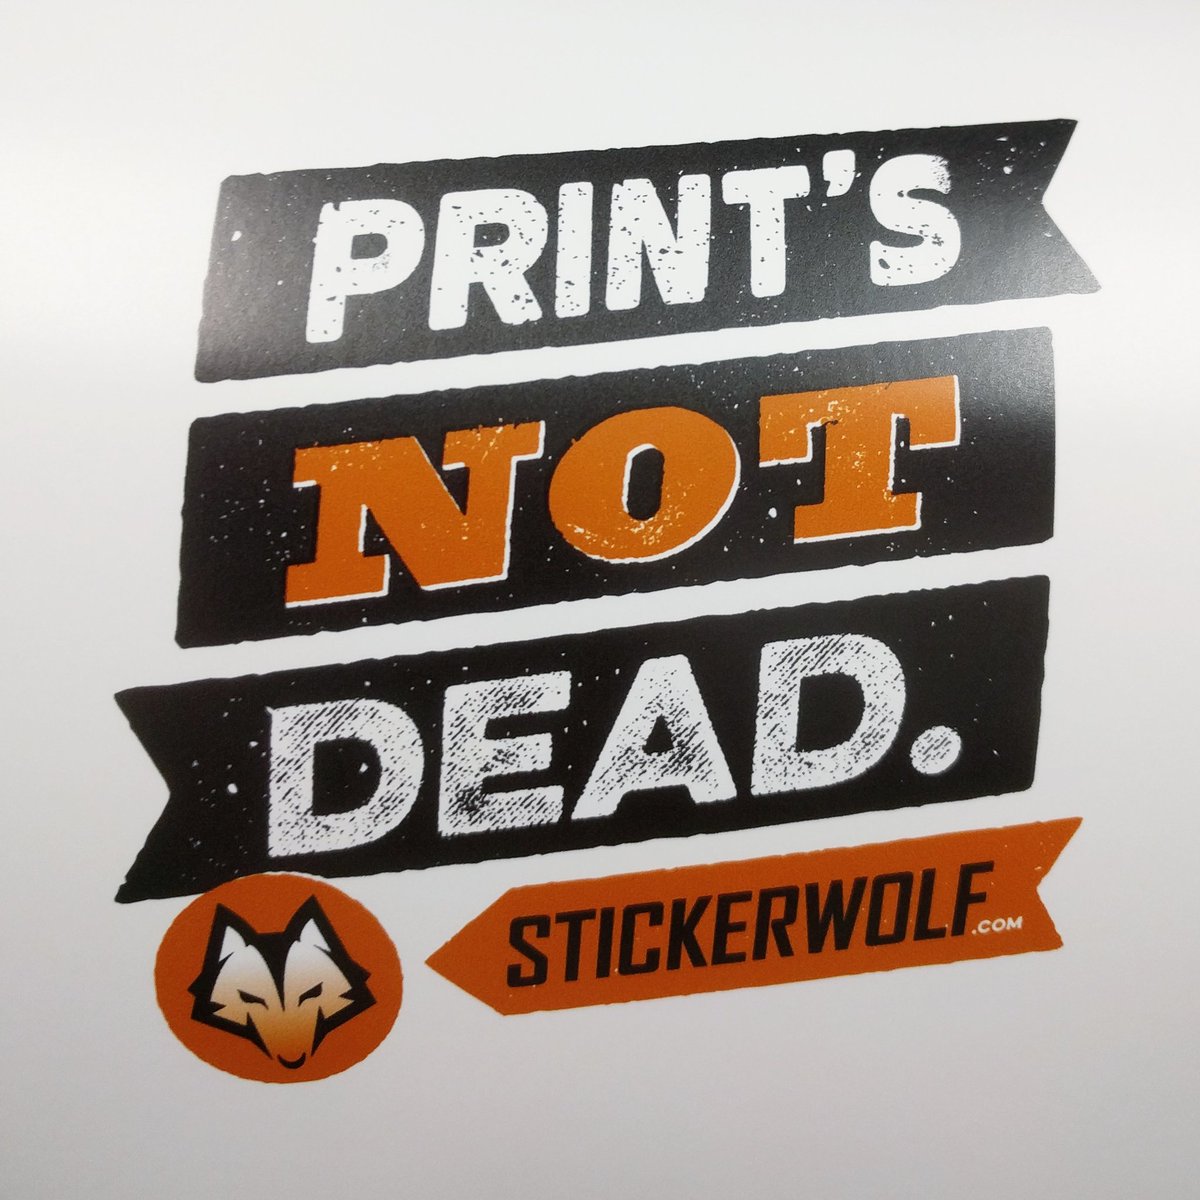 Ain't that the truth. #printsnotdead #printisnotdead #printer #stickerprinter #weloveprint #welovestickers #notdead #print #stickers #slaps #stickerwolf